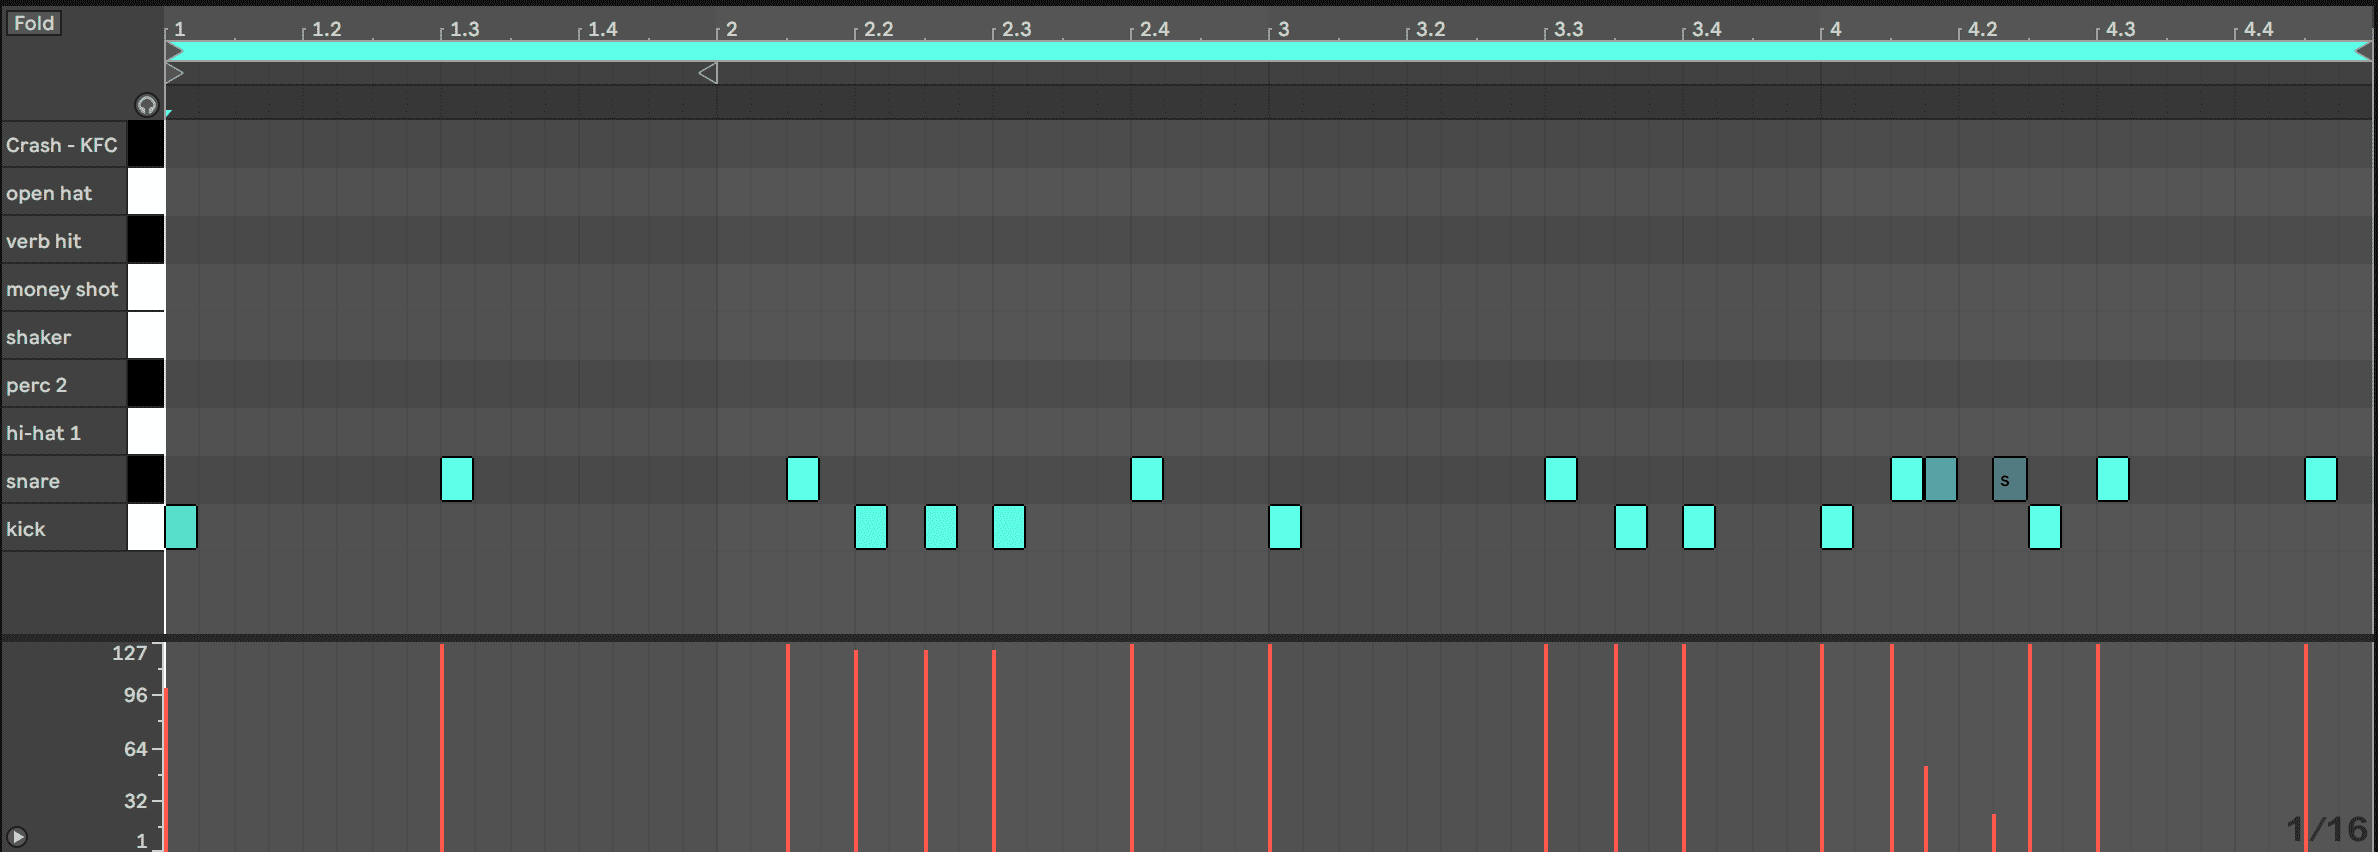 how to make a grime beat on garageband